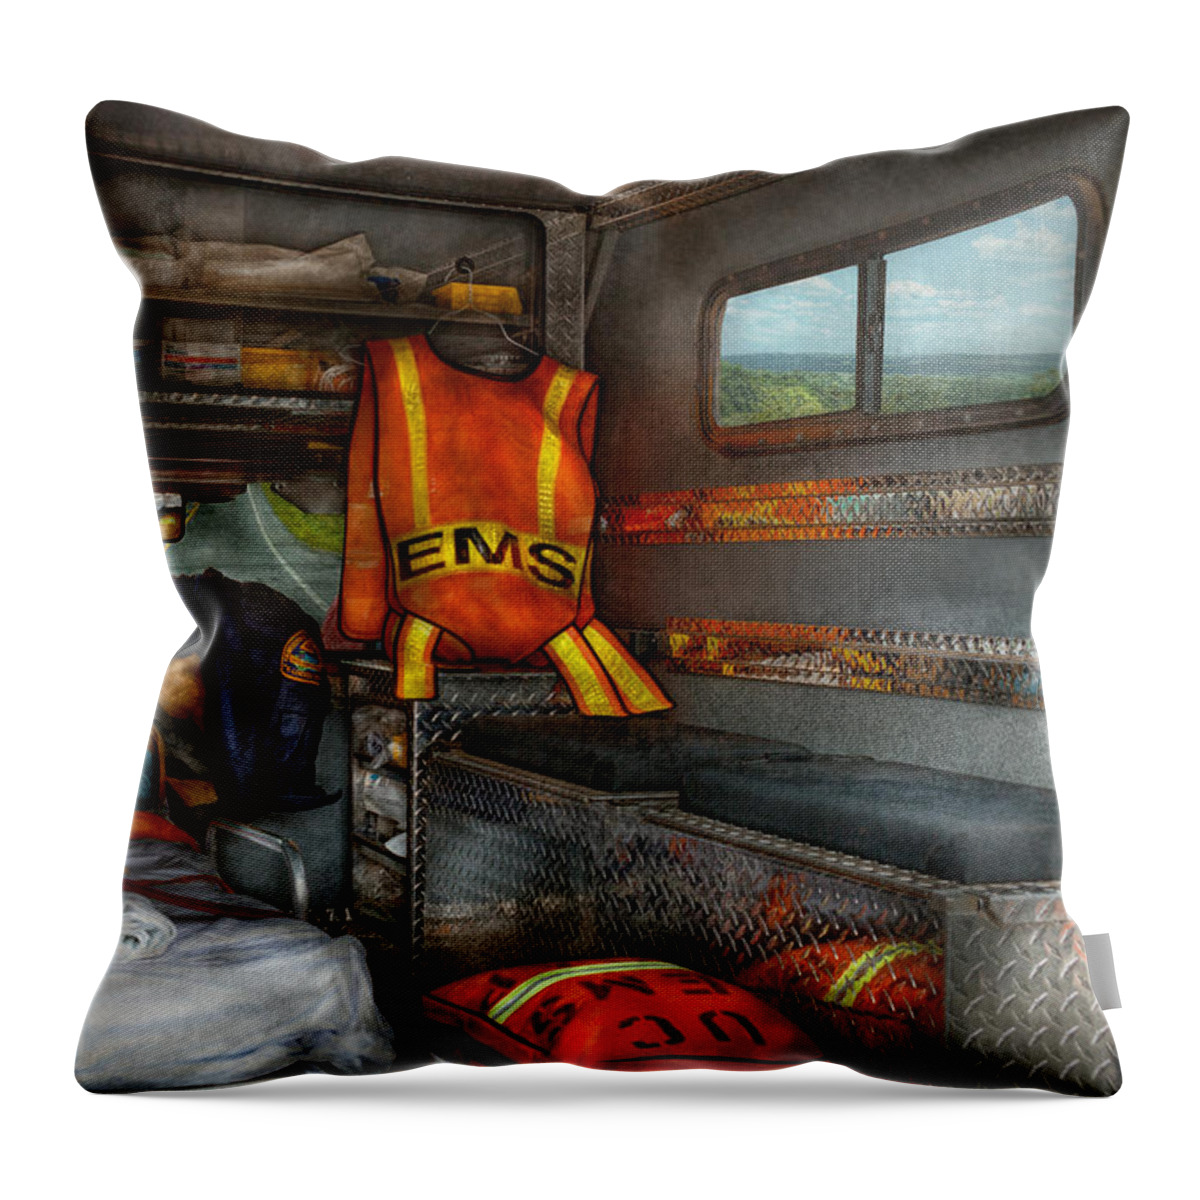 Rescue Throw Pillow featuring the photograph Rescue - Emergency Squad by Mike Savad